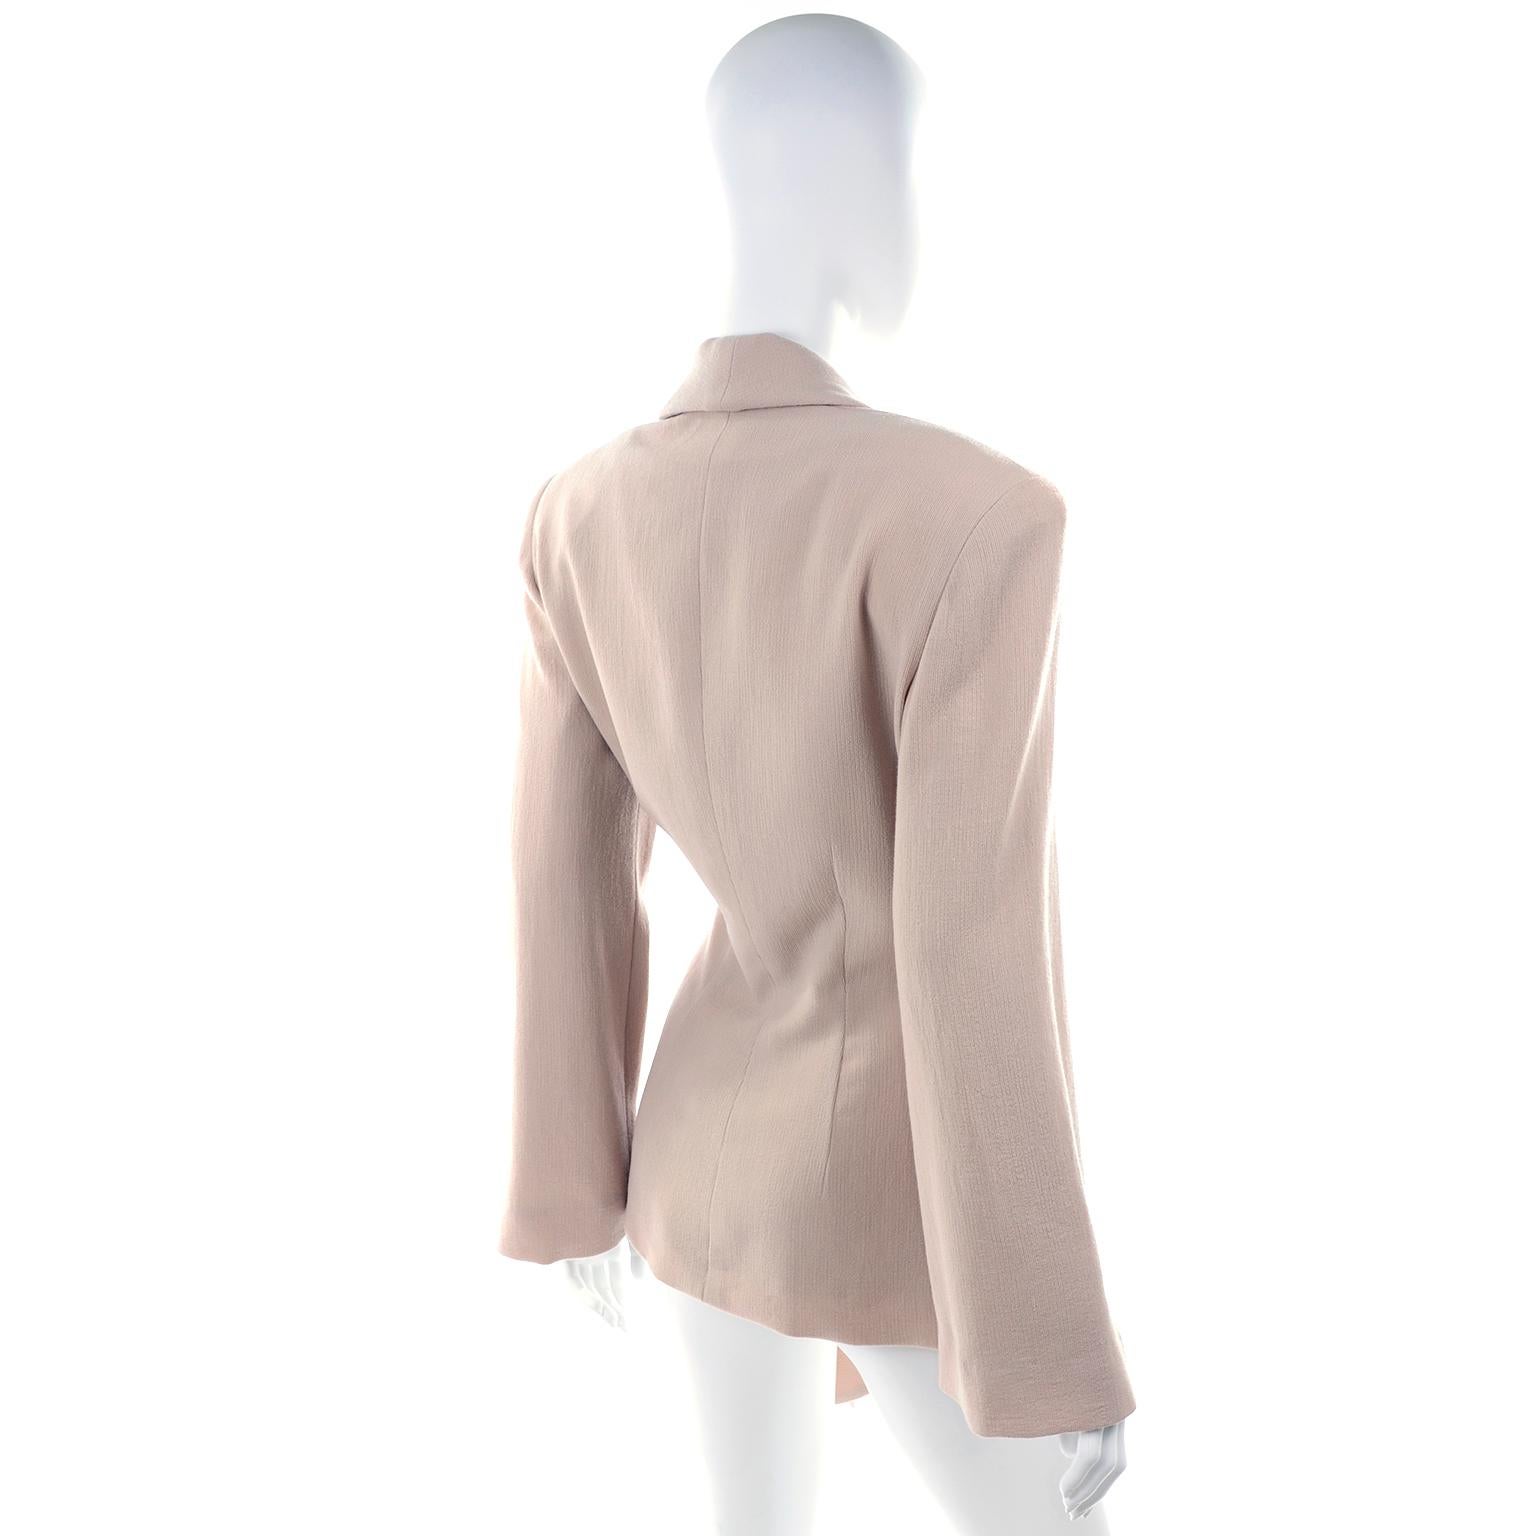 Women's 1990s Vintage Donna Karan Draped Tan Wool Blazer New With Tag Attached